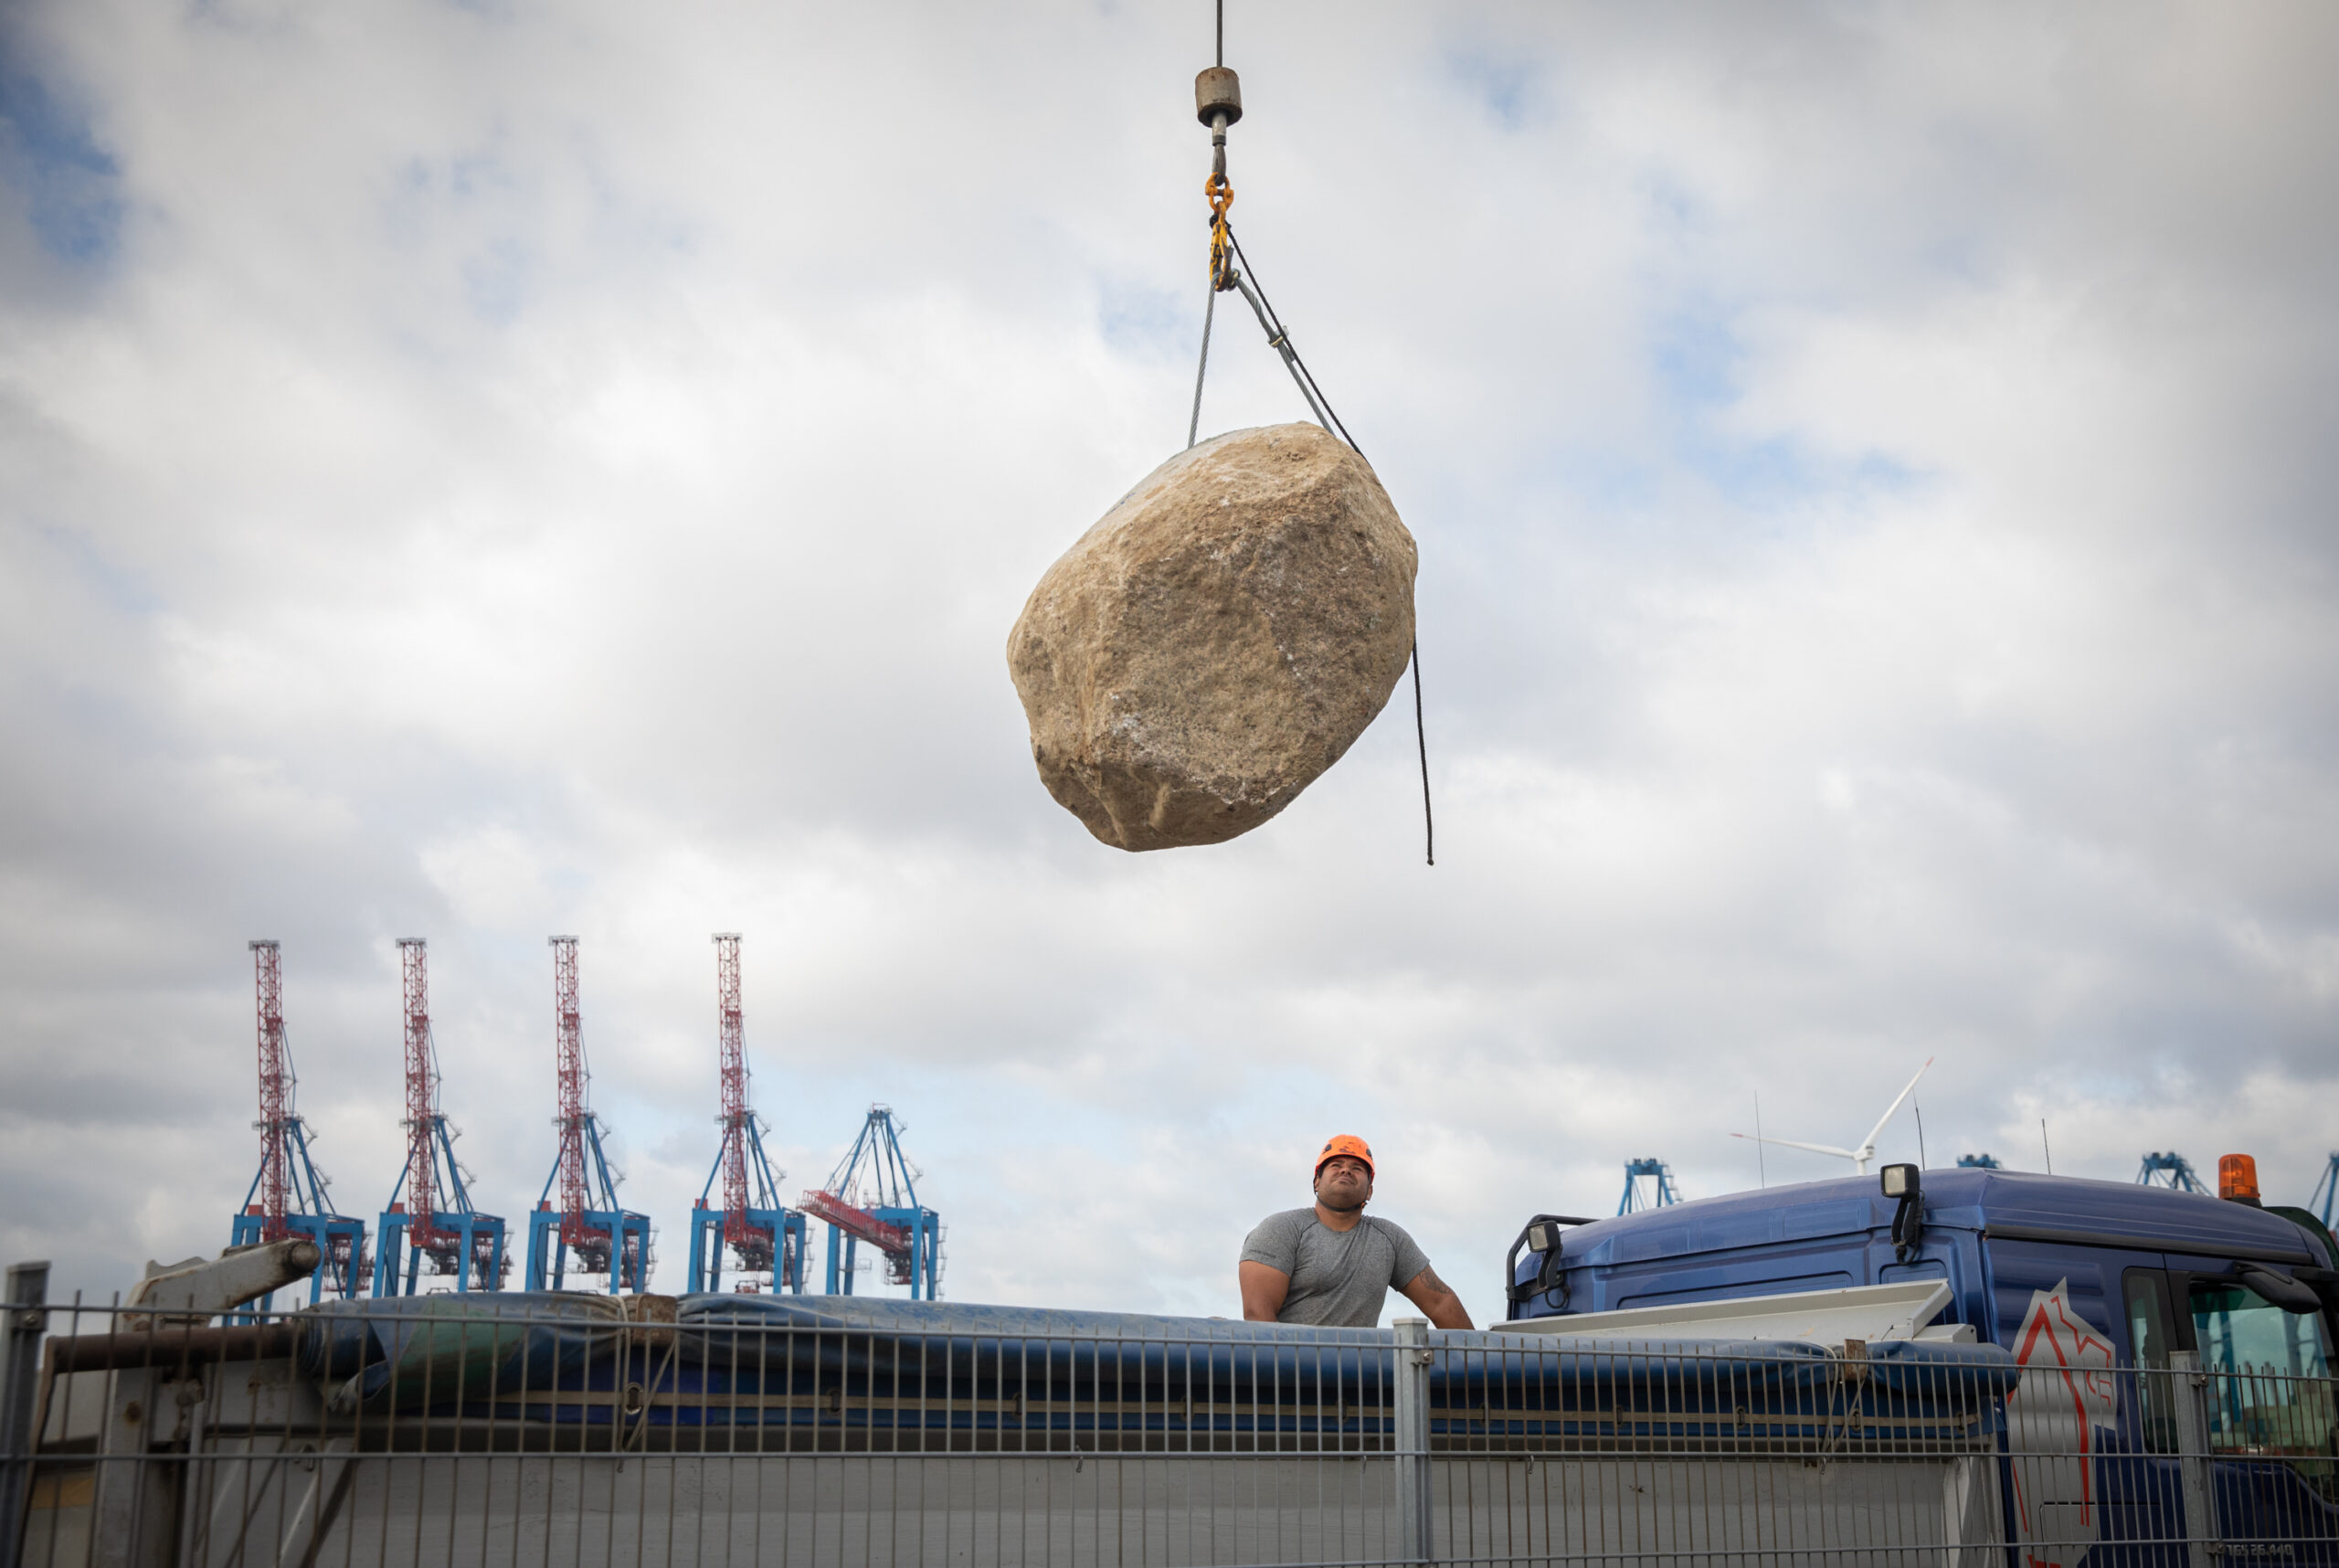 A Greenpeace crew member looks on as a boulder is lifted on board the ship. A row of giant port cranes are visible in the background